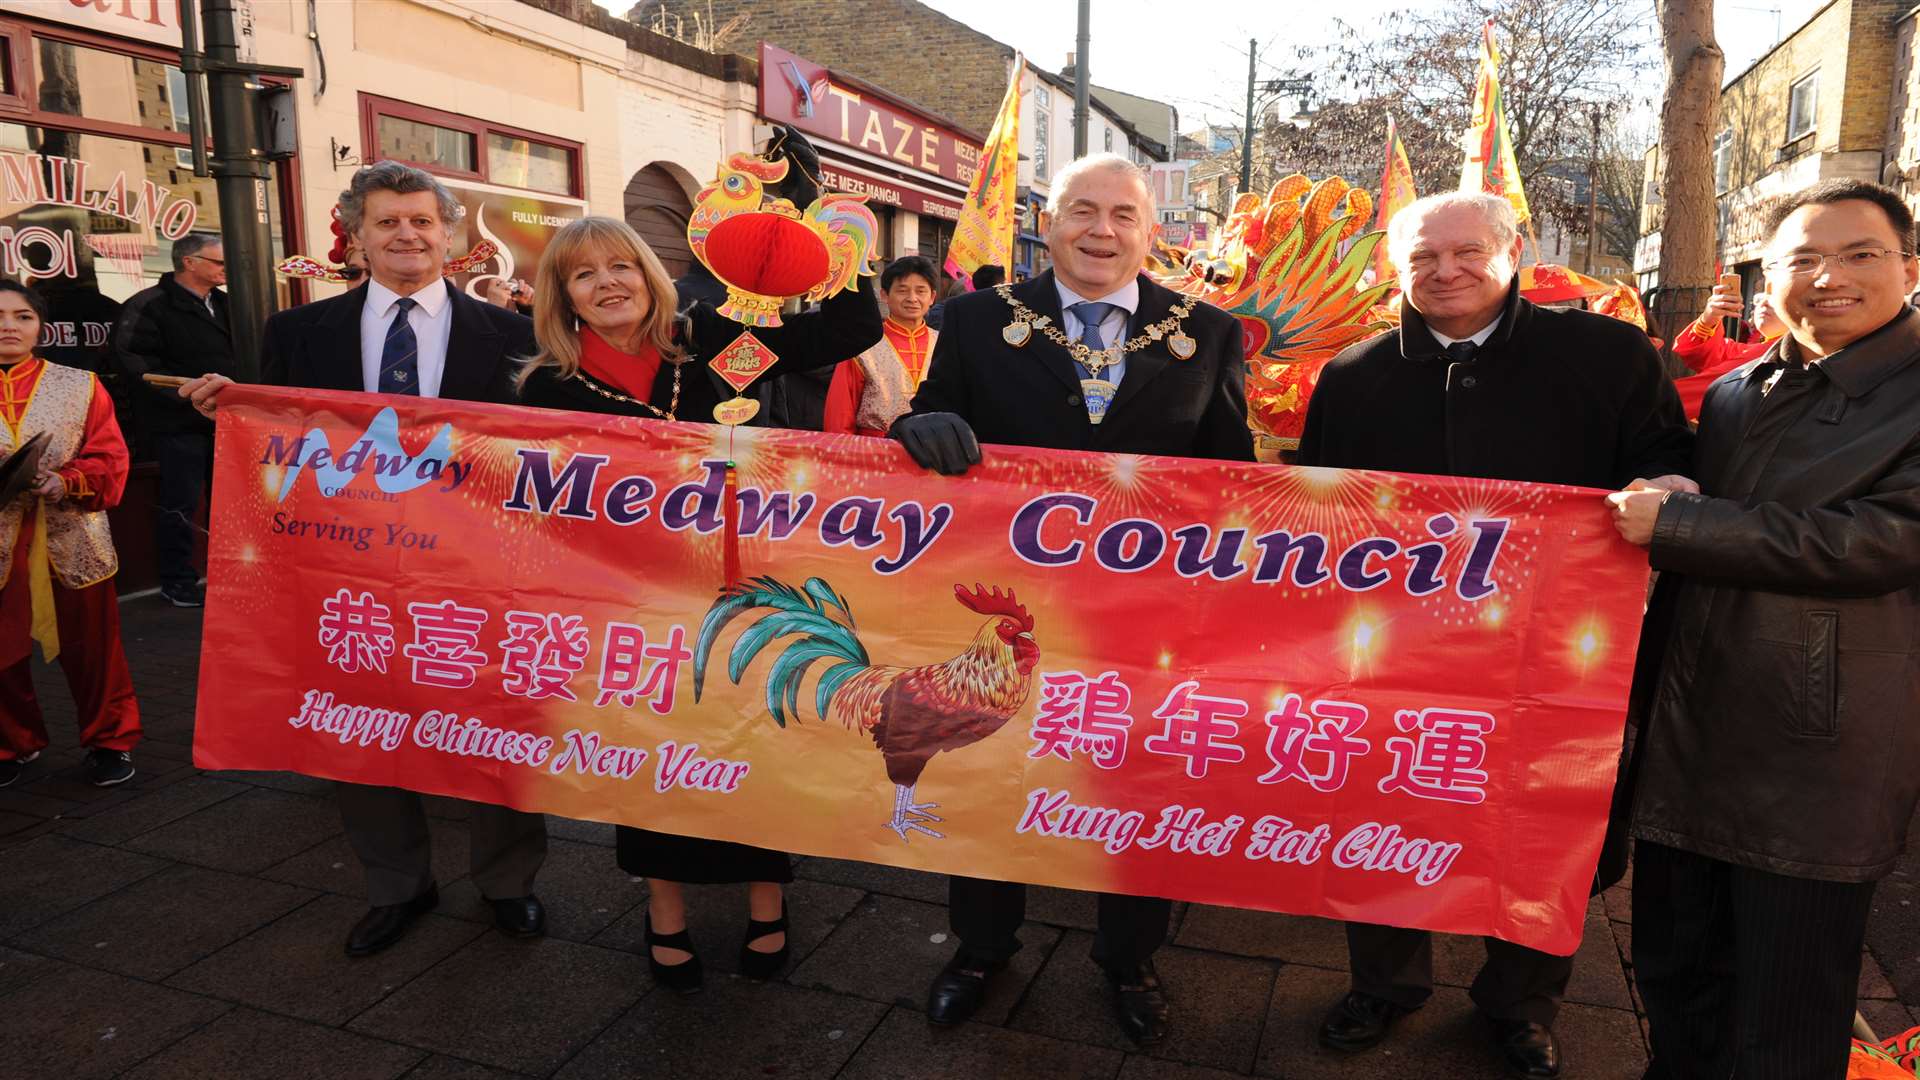 The Mayor of Medway and others at the celebrations.